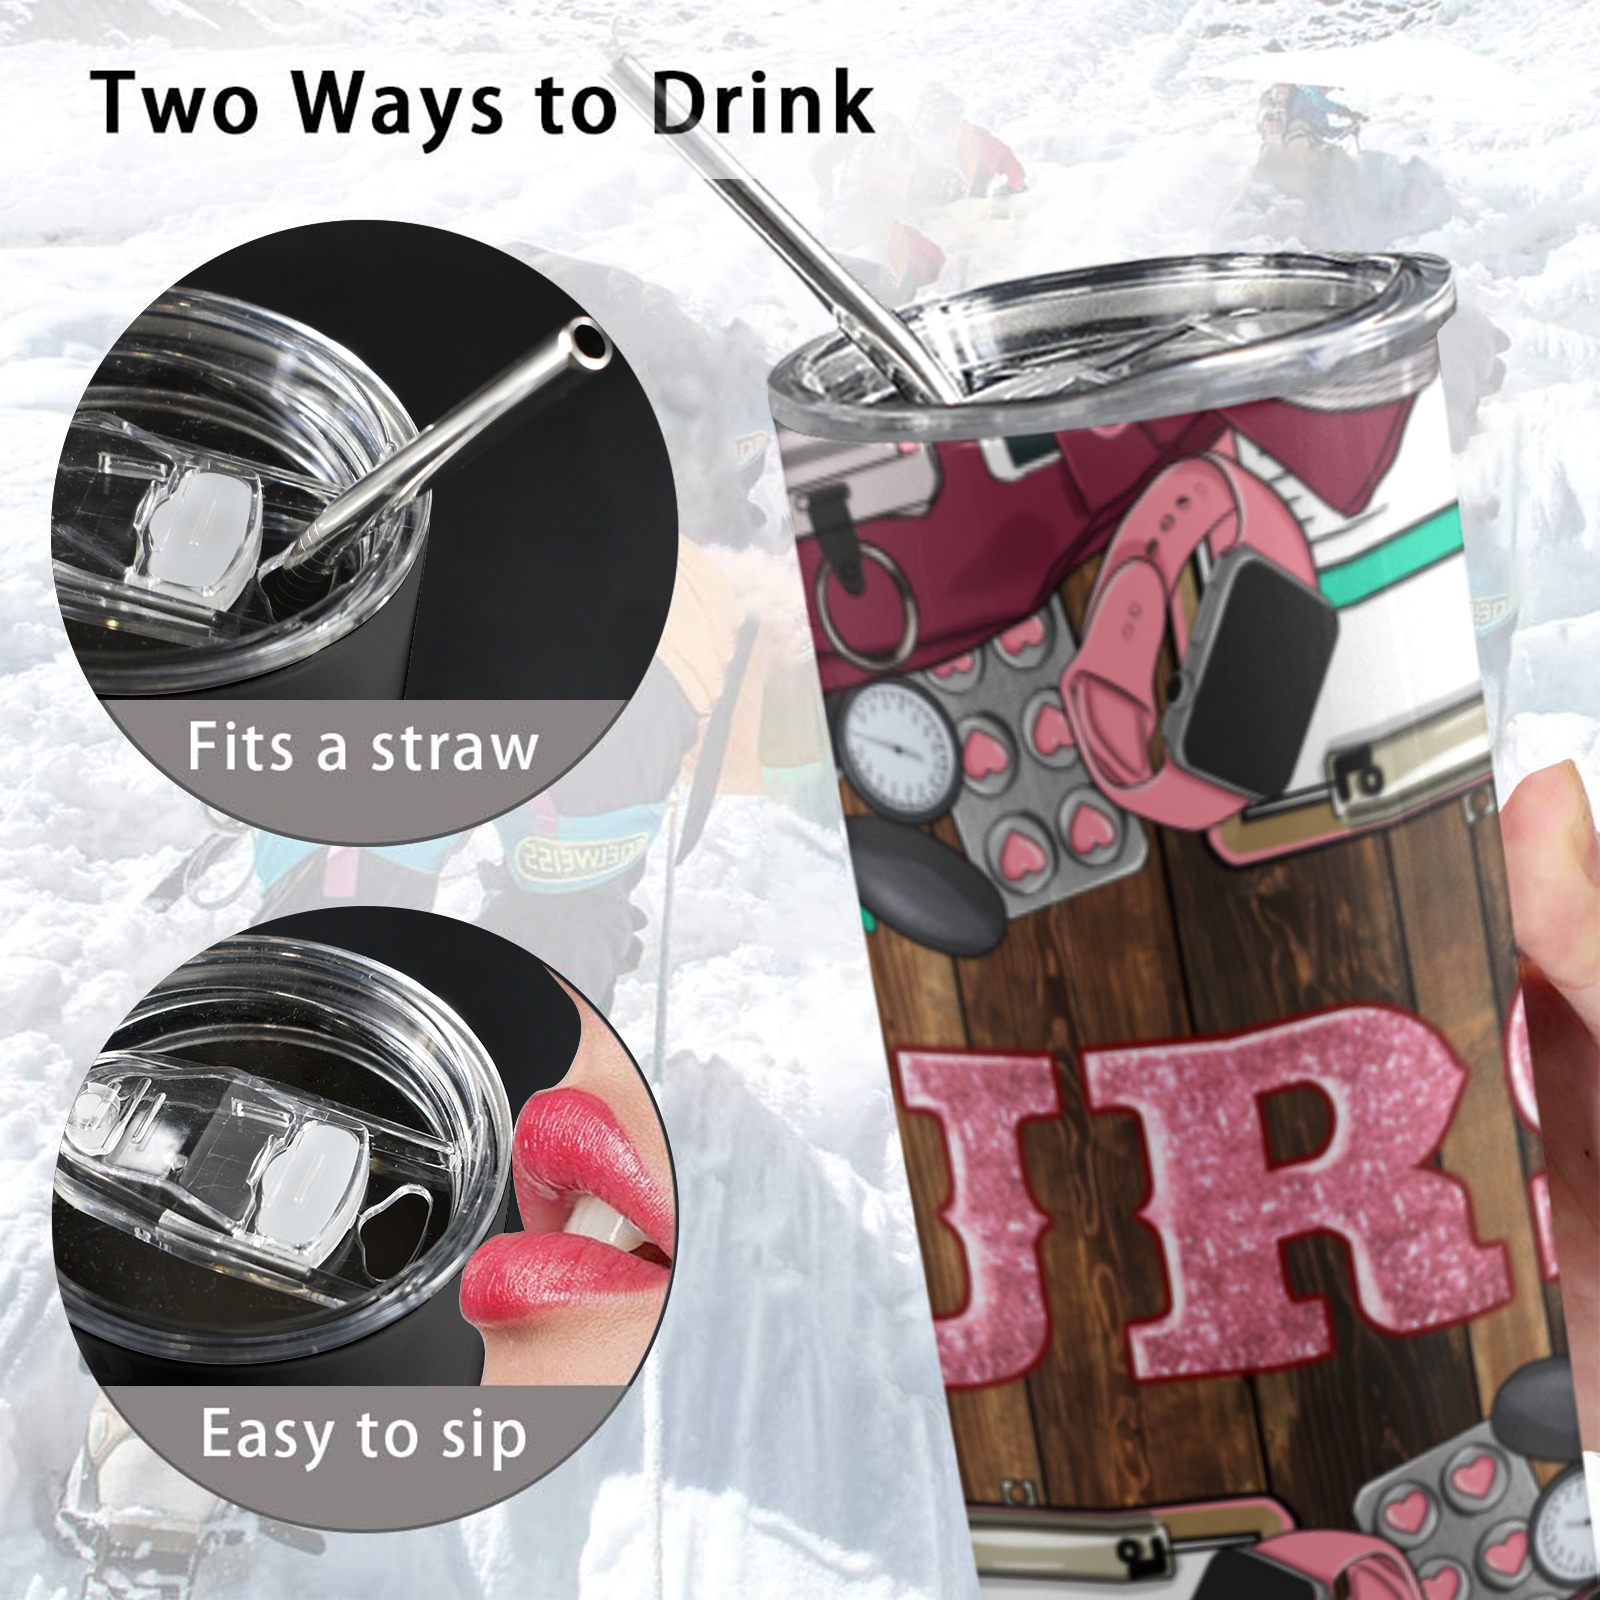 Nurse_Tumbler 20oz Tall Skinny Tumbler with Lid and Straw